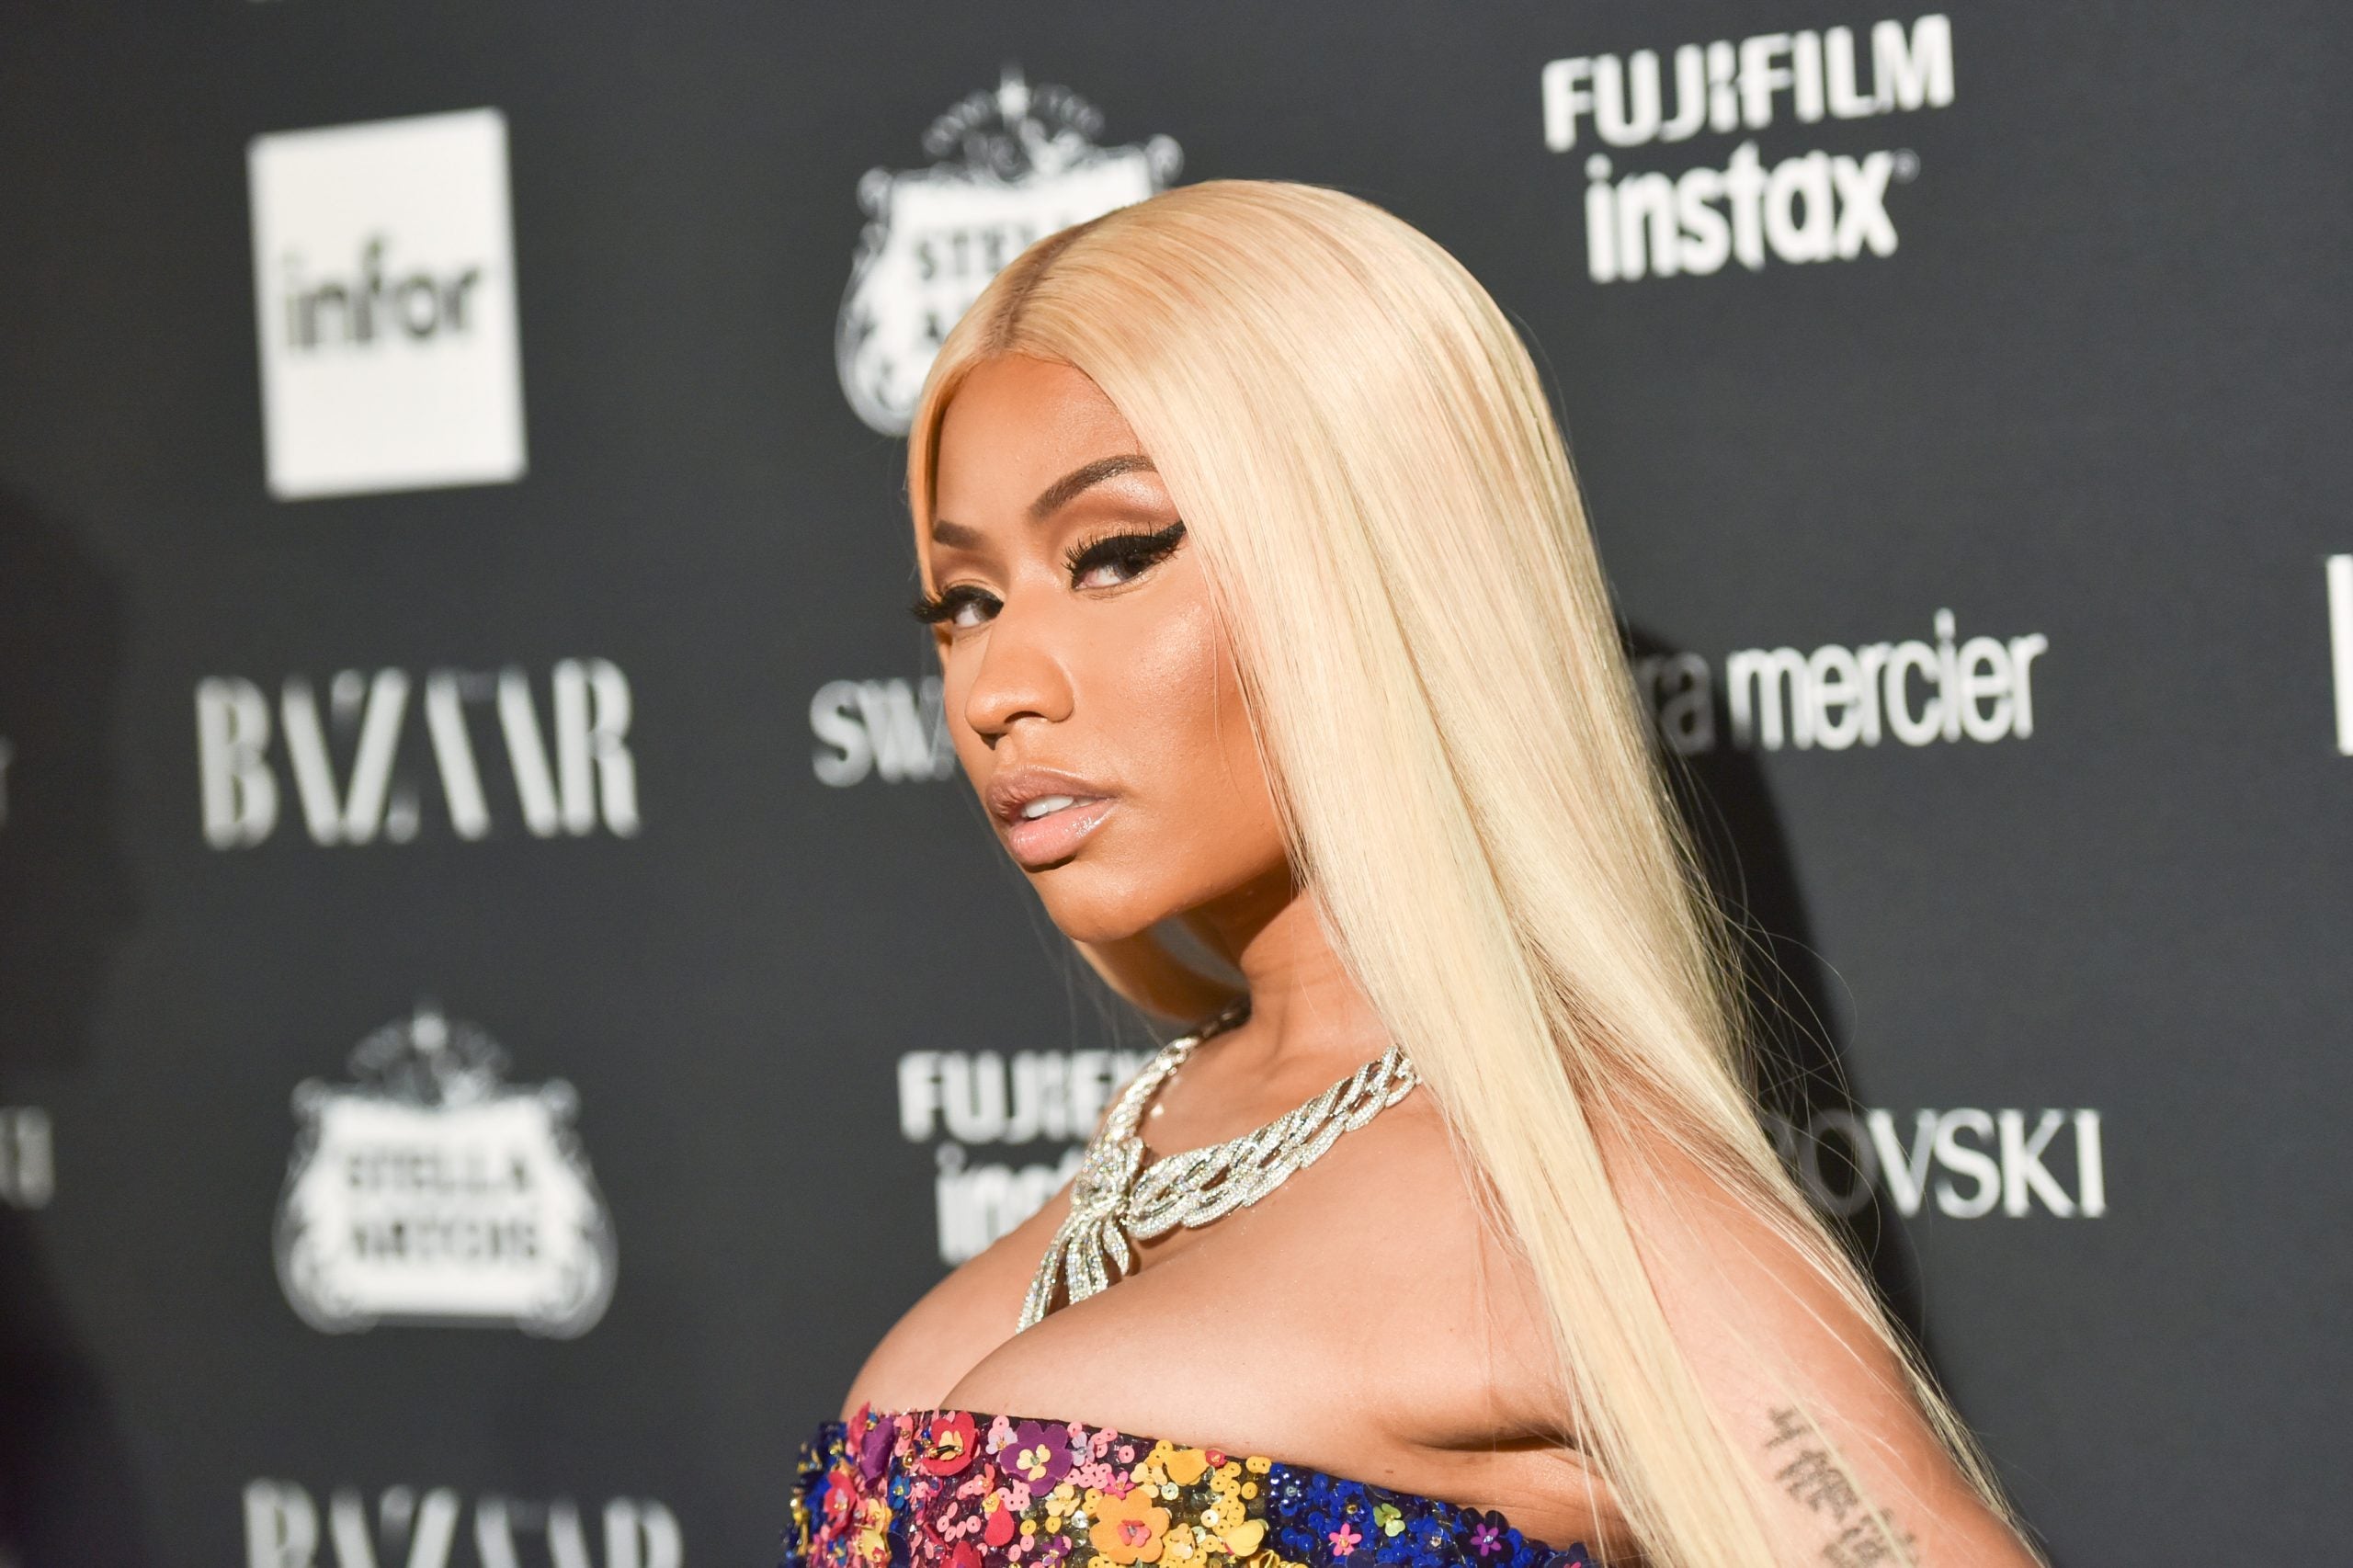 A Pregnant Nicki Minaj Rapping Her New Song Is The Best Thing We've Seen Today